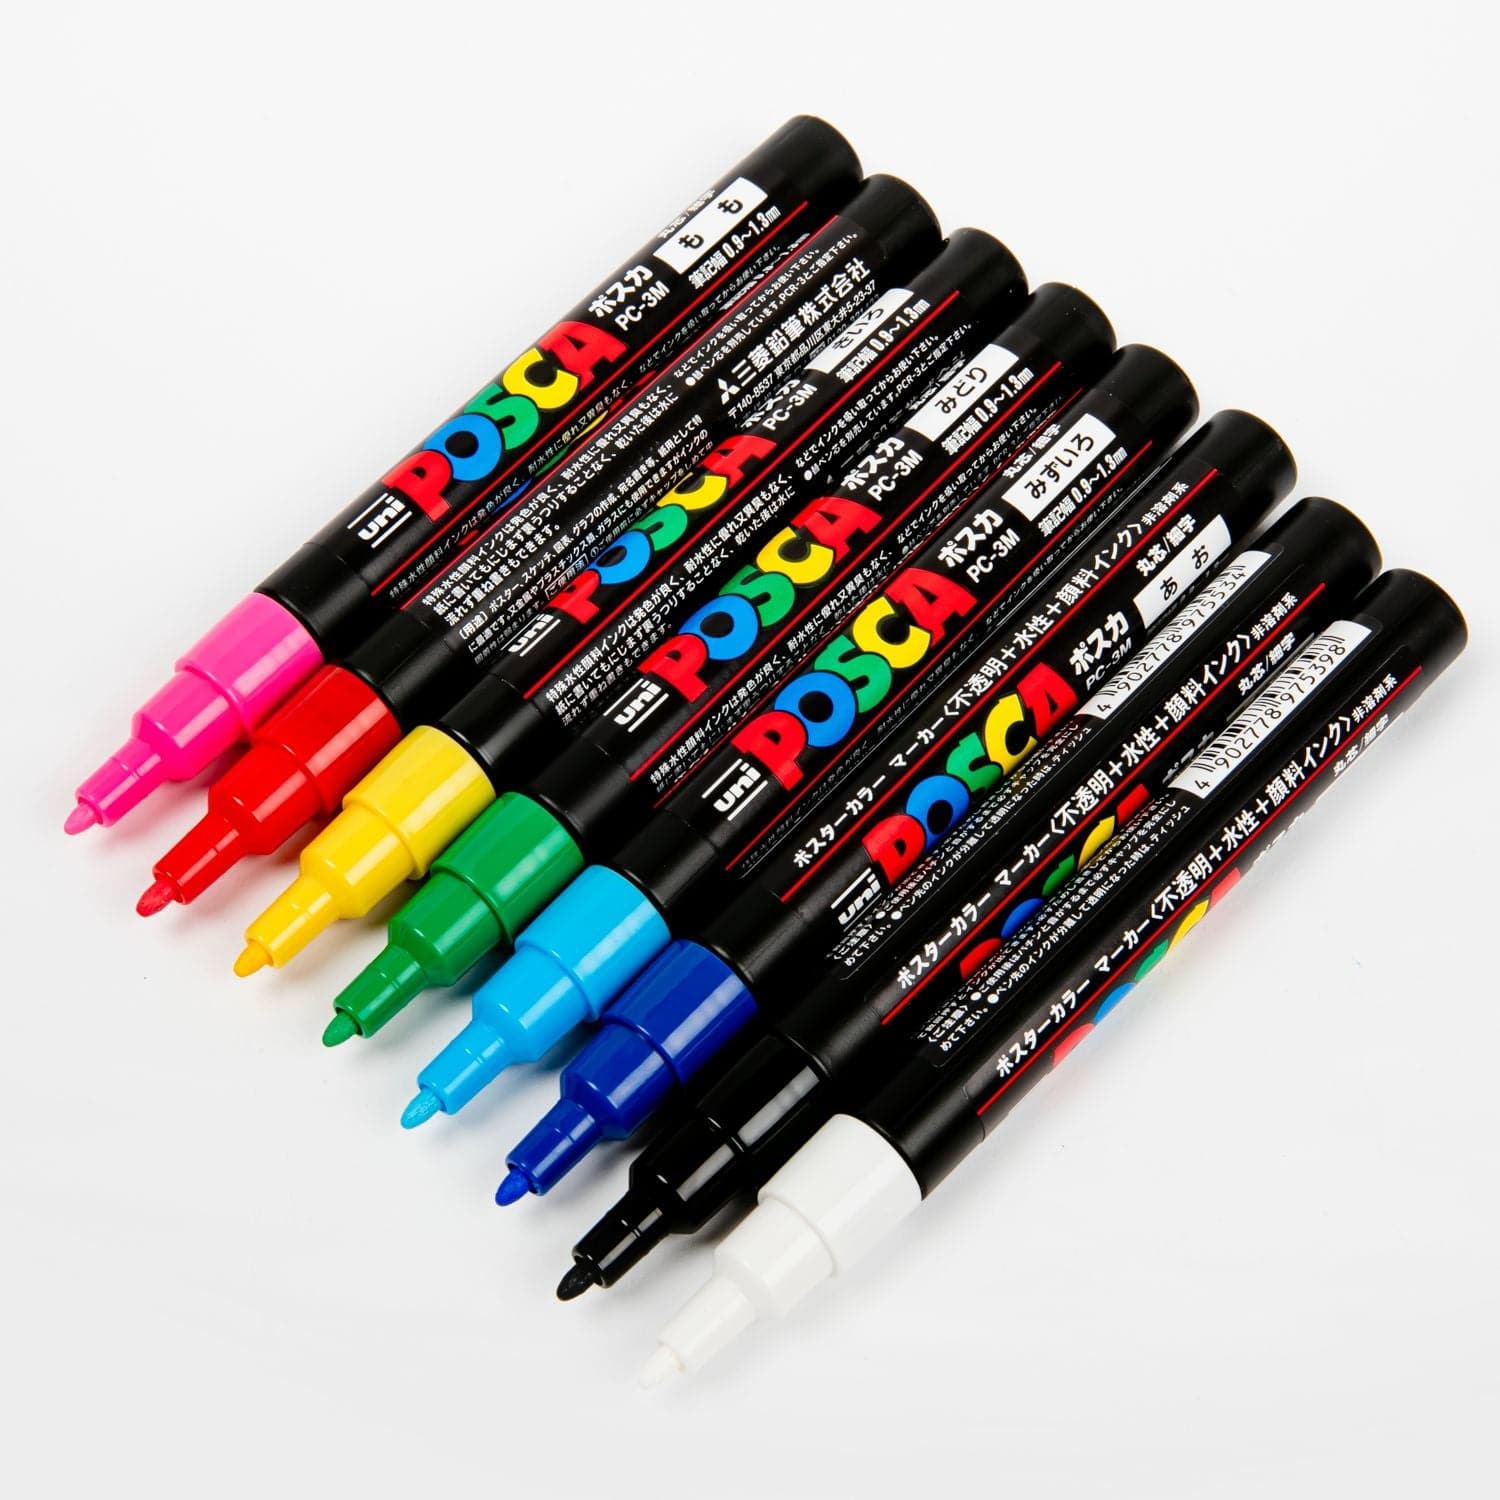 https://www.shopriot.shop/wp-content/uploads/1689/28/posca-paint-marker-pen-medium-point-set-of-7-natural-color-pc-5m-7c-959-keep-active-and-fit-keep-active-and-fit-keep-active-and-fit_5.jpg